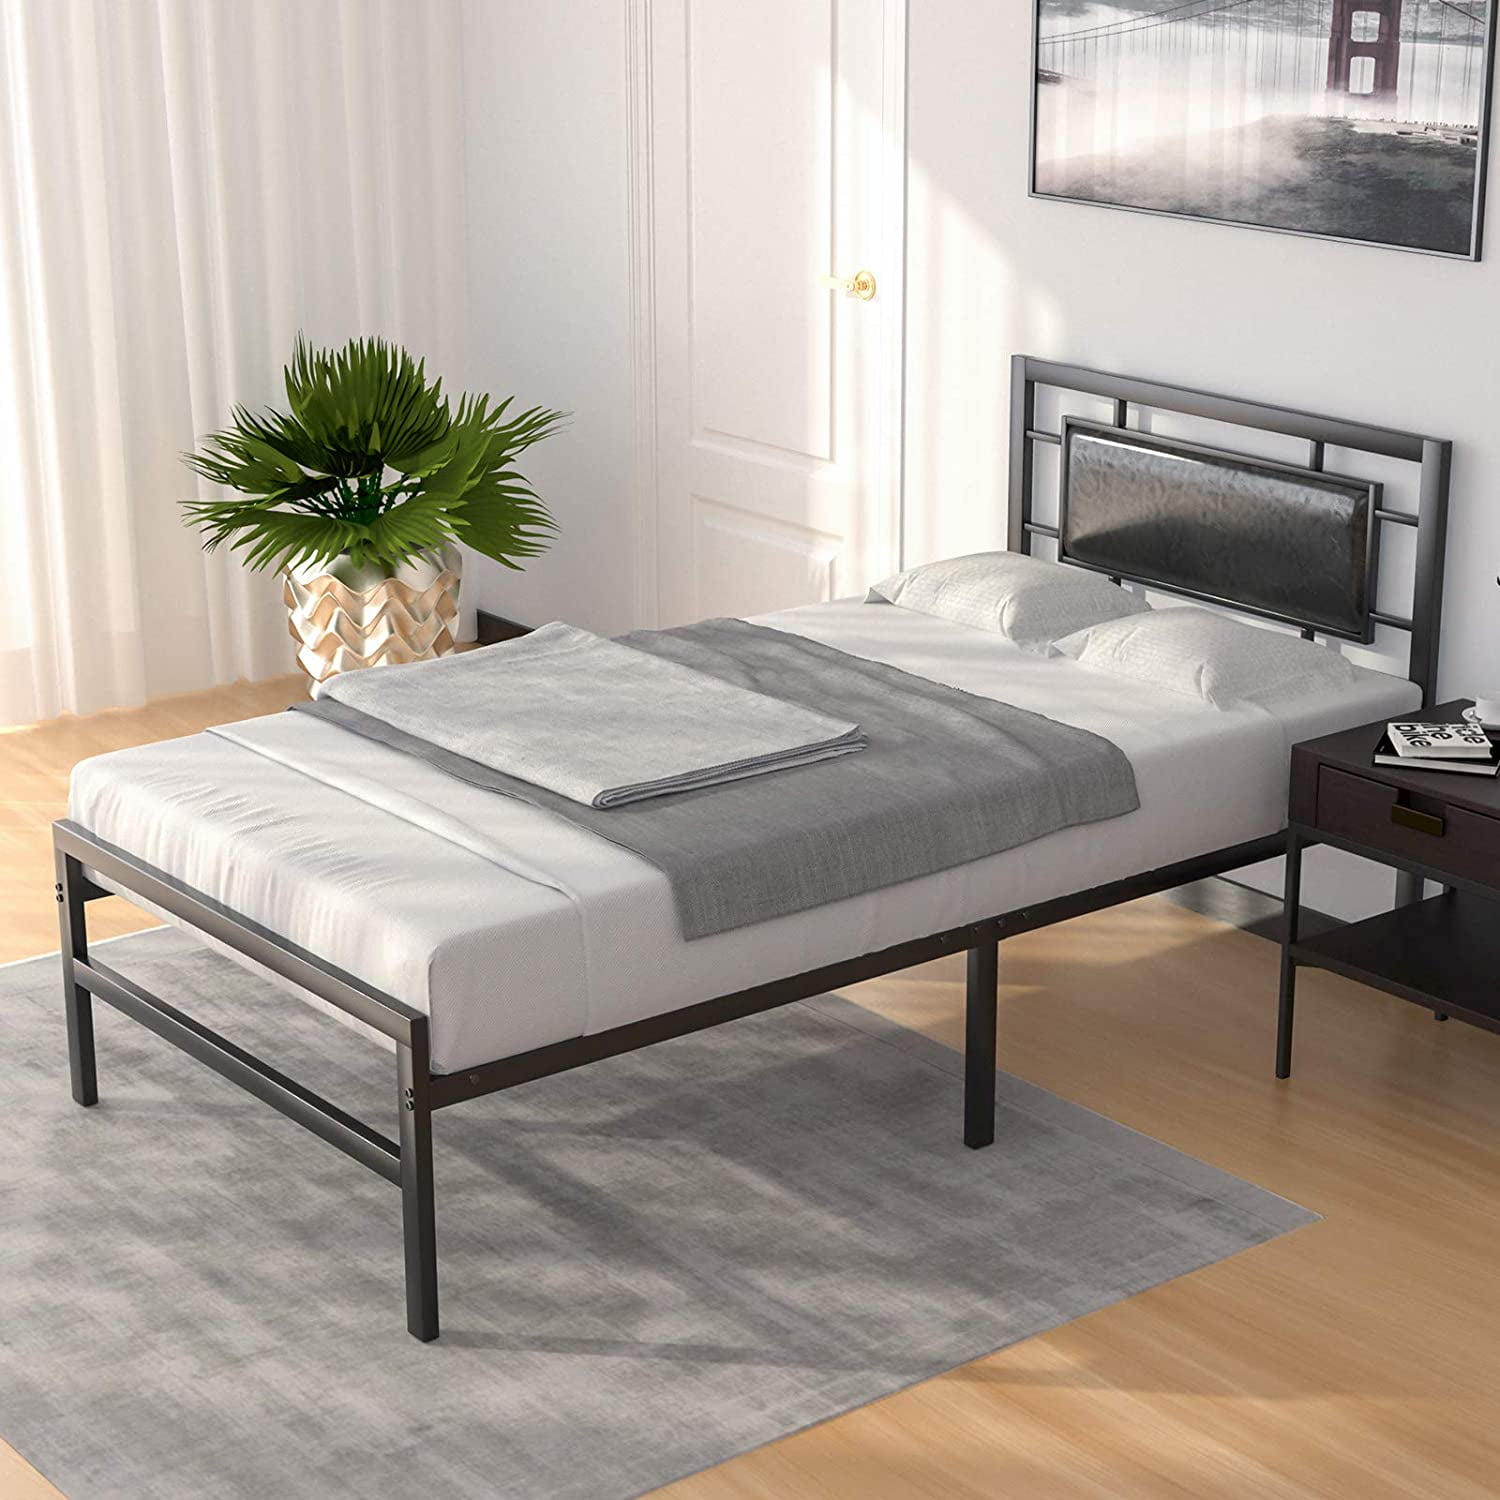 Mecor Vintage Metal Twin Bed Frame, Old Metal Twin Bed